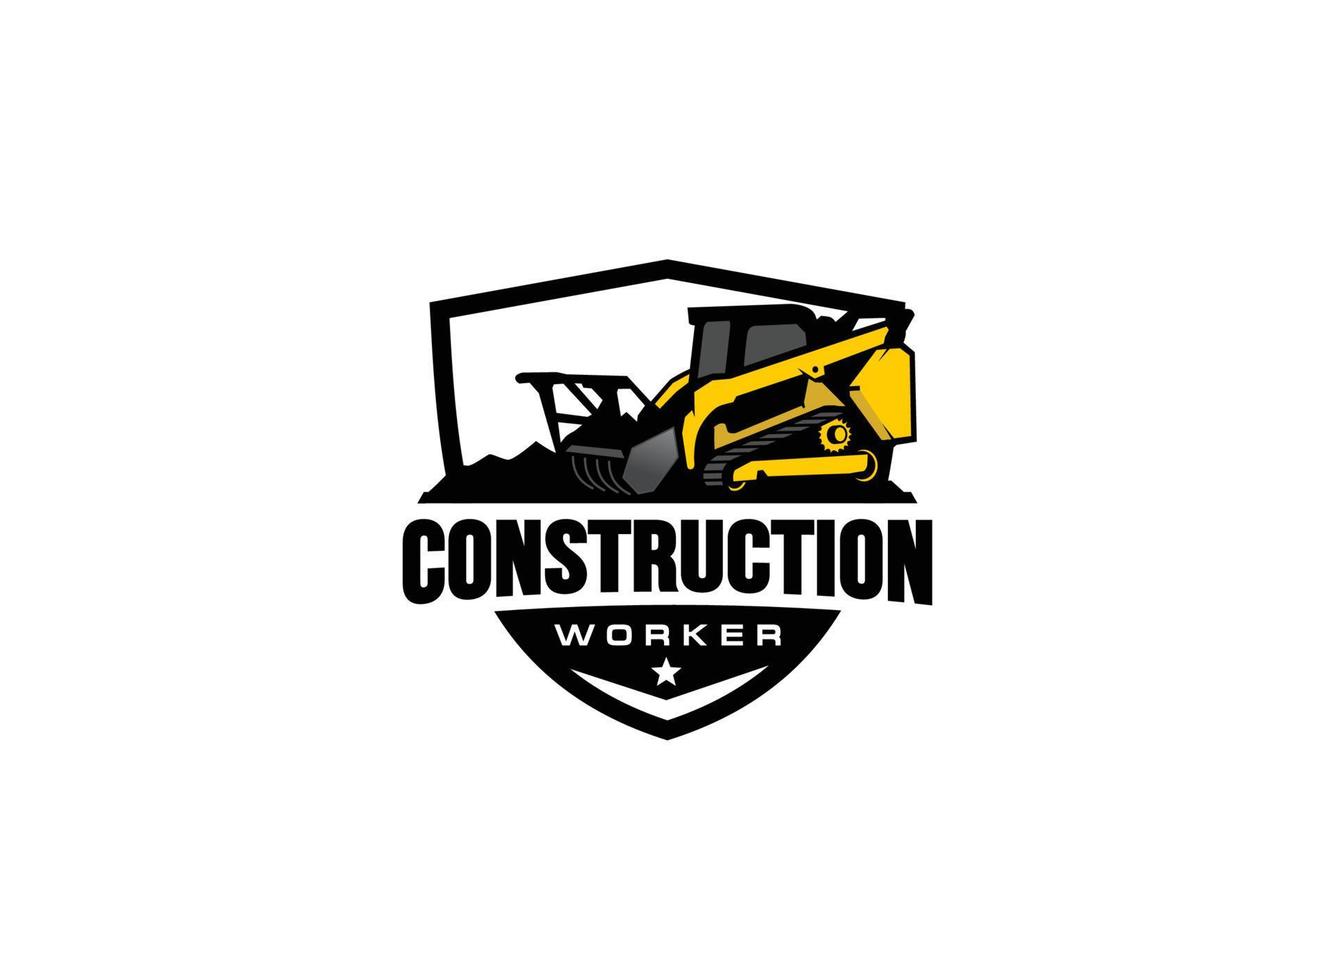 Skid steer land clearing logo vector for construction company. Heavy equipment template vector illustration for your brand.